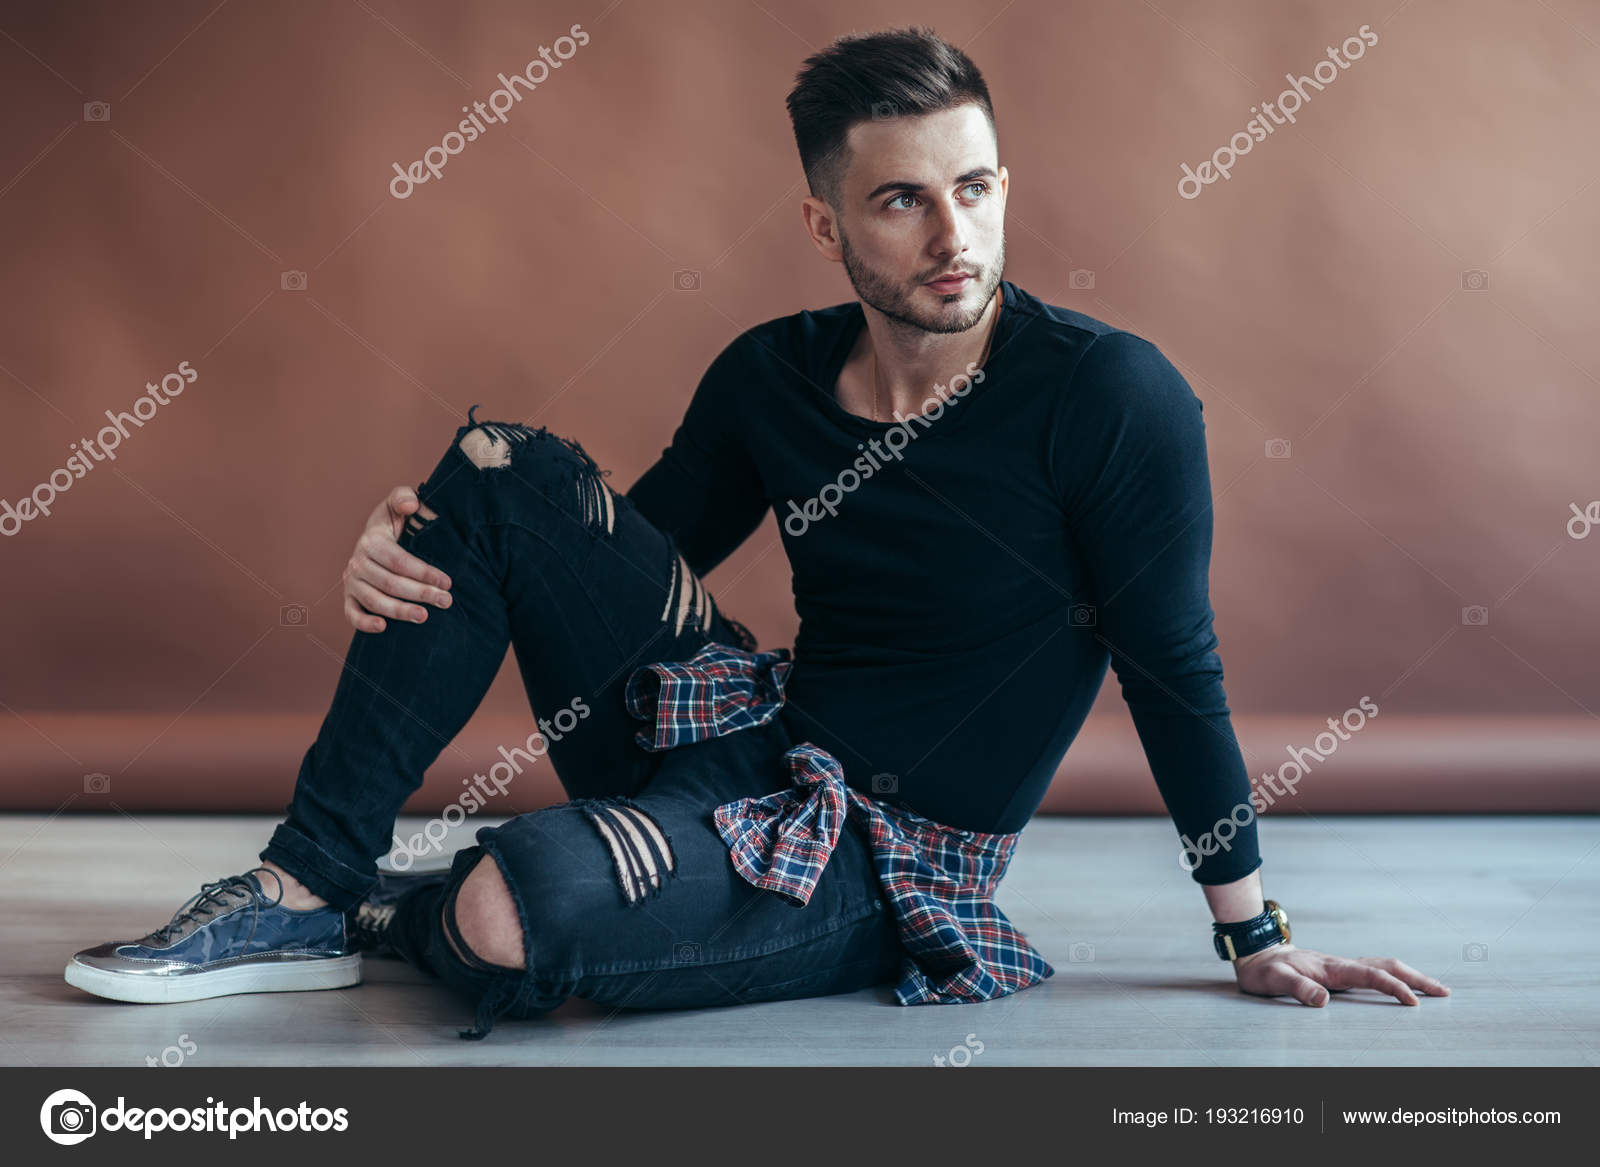 Best Poses for Man l Stylish Photo Poses for Men ll Boys Photography Pose l  Photoshoot - YouTube